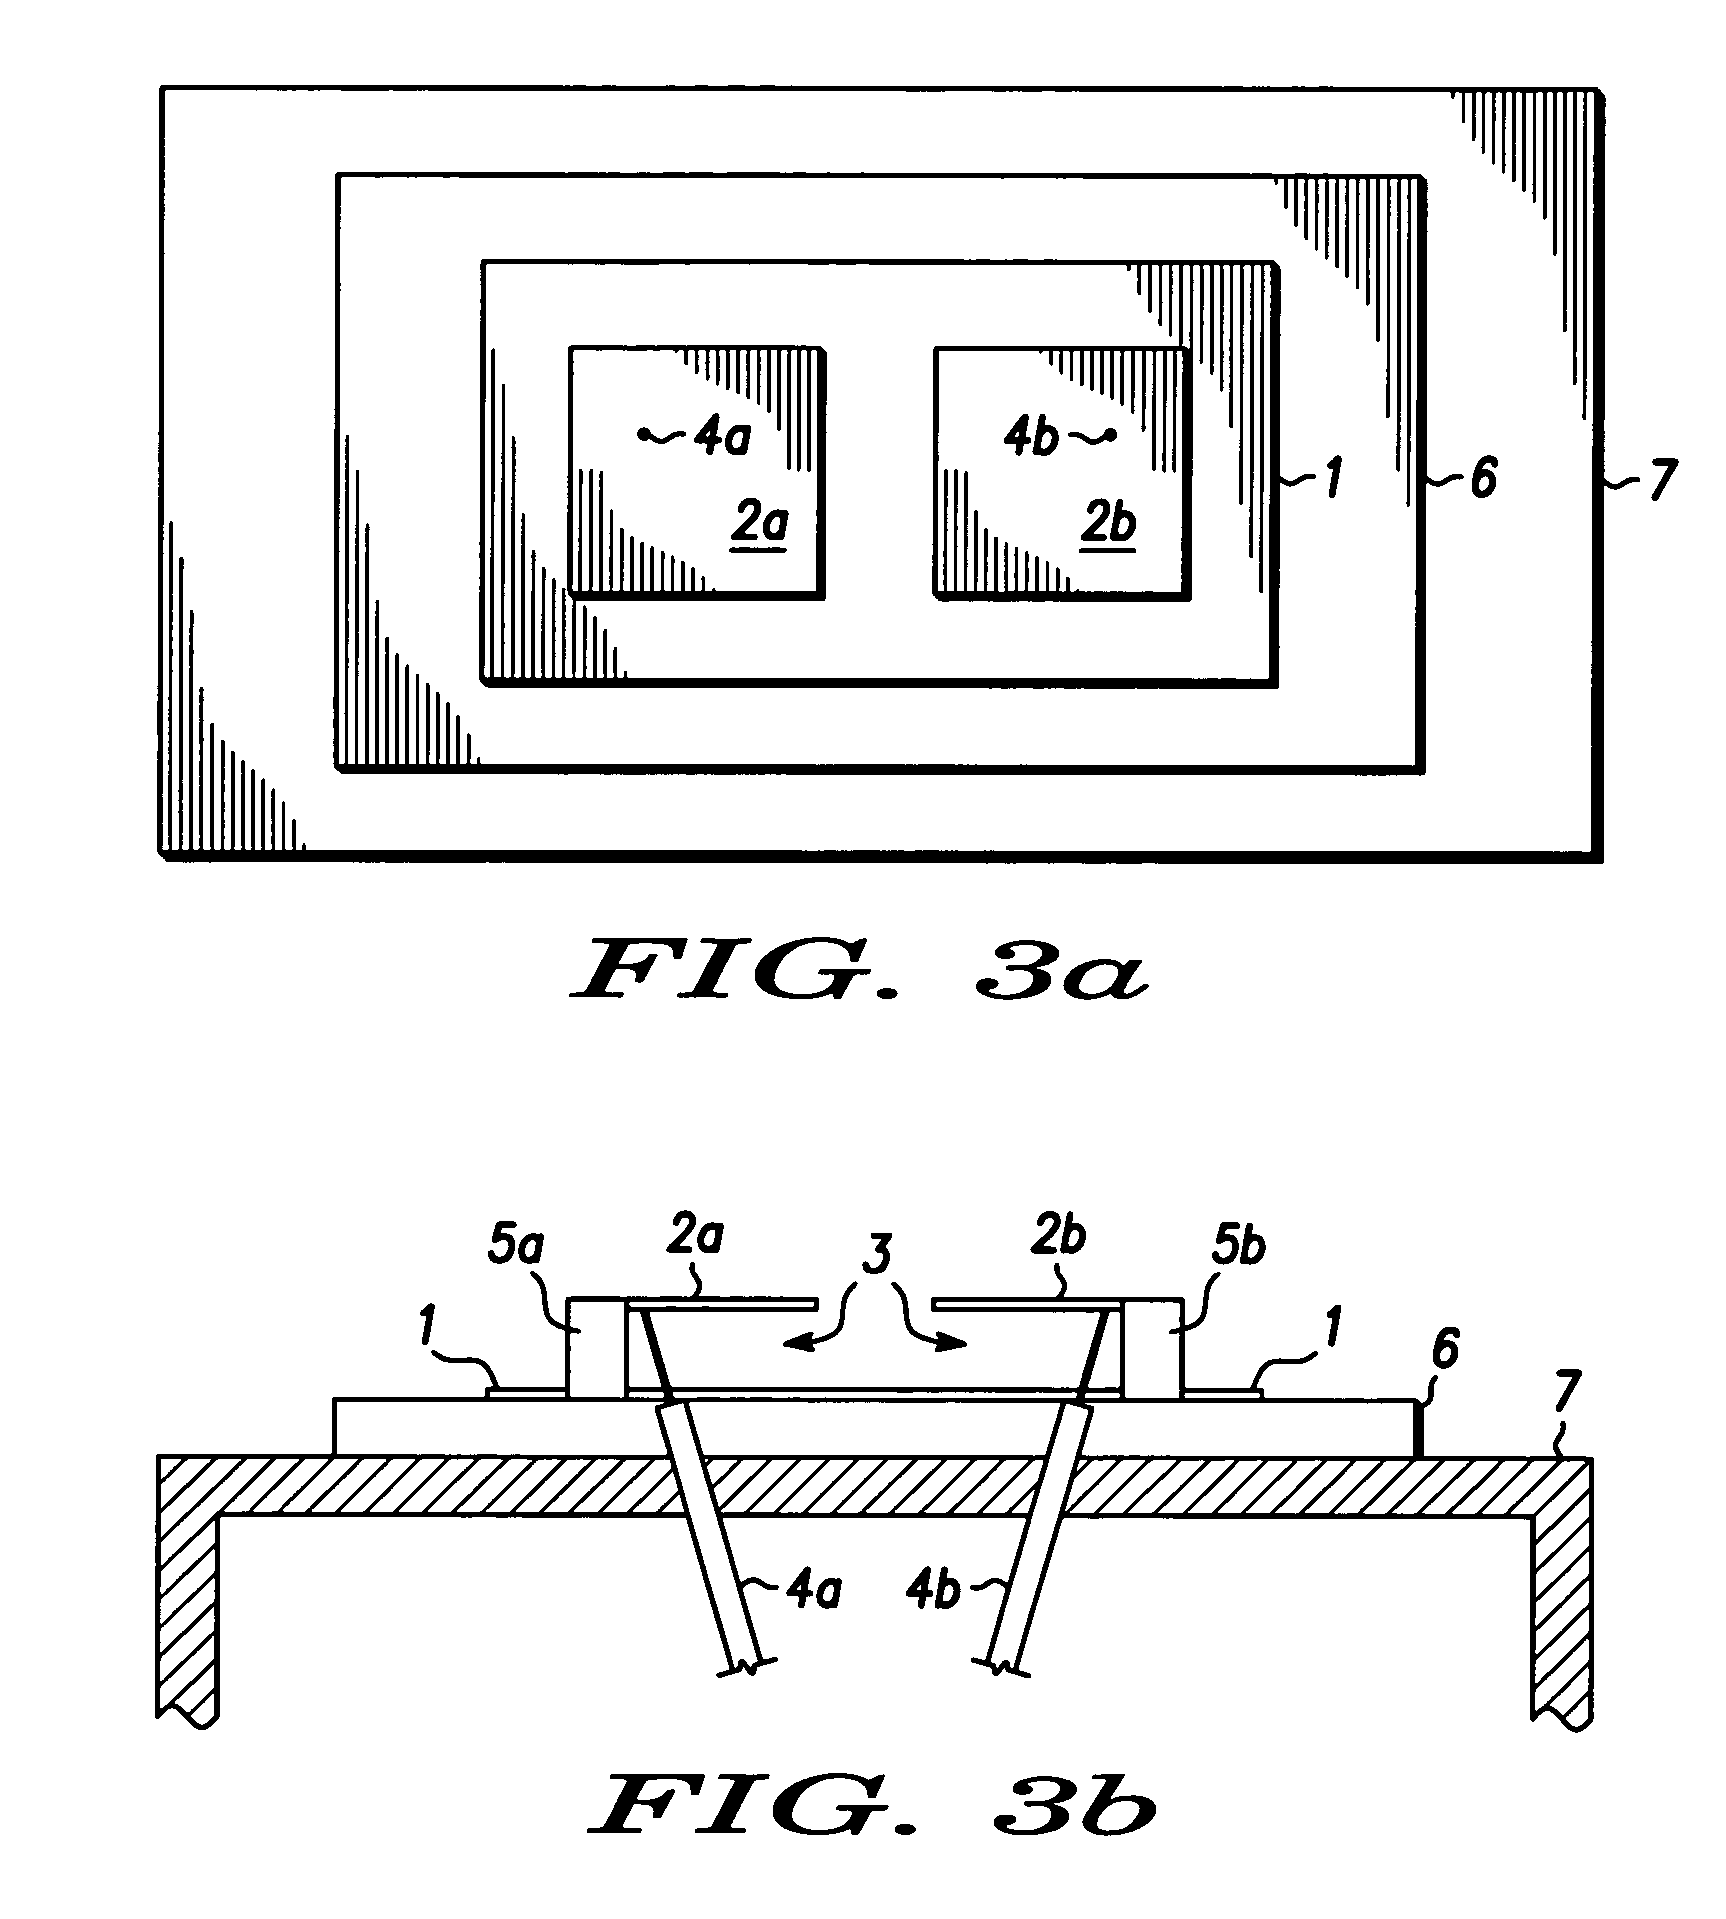 Antenna structures and their use in wireless communication devices